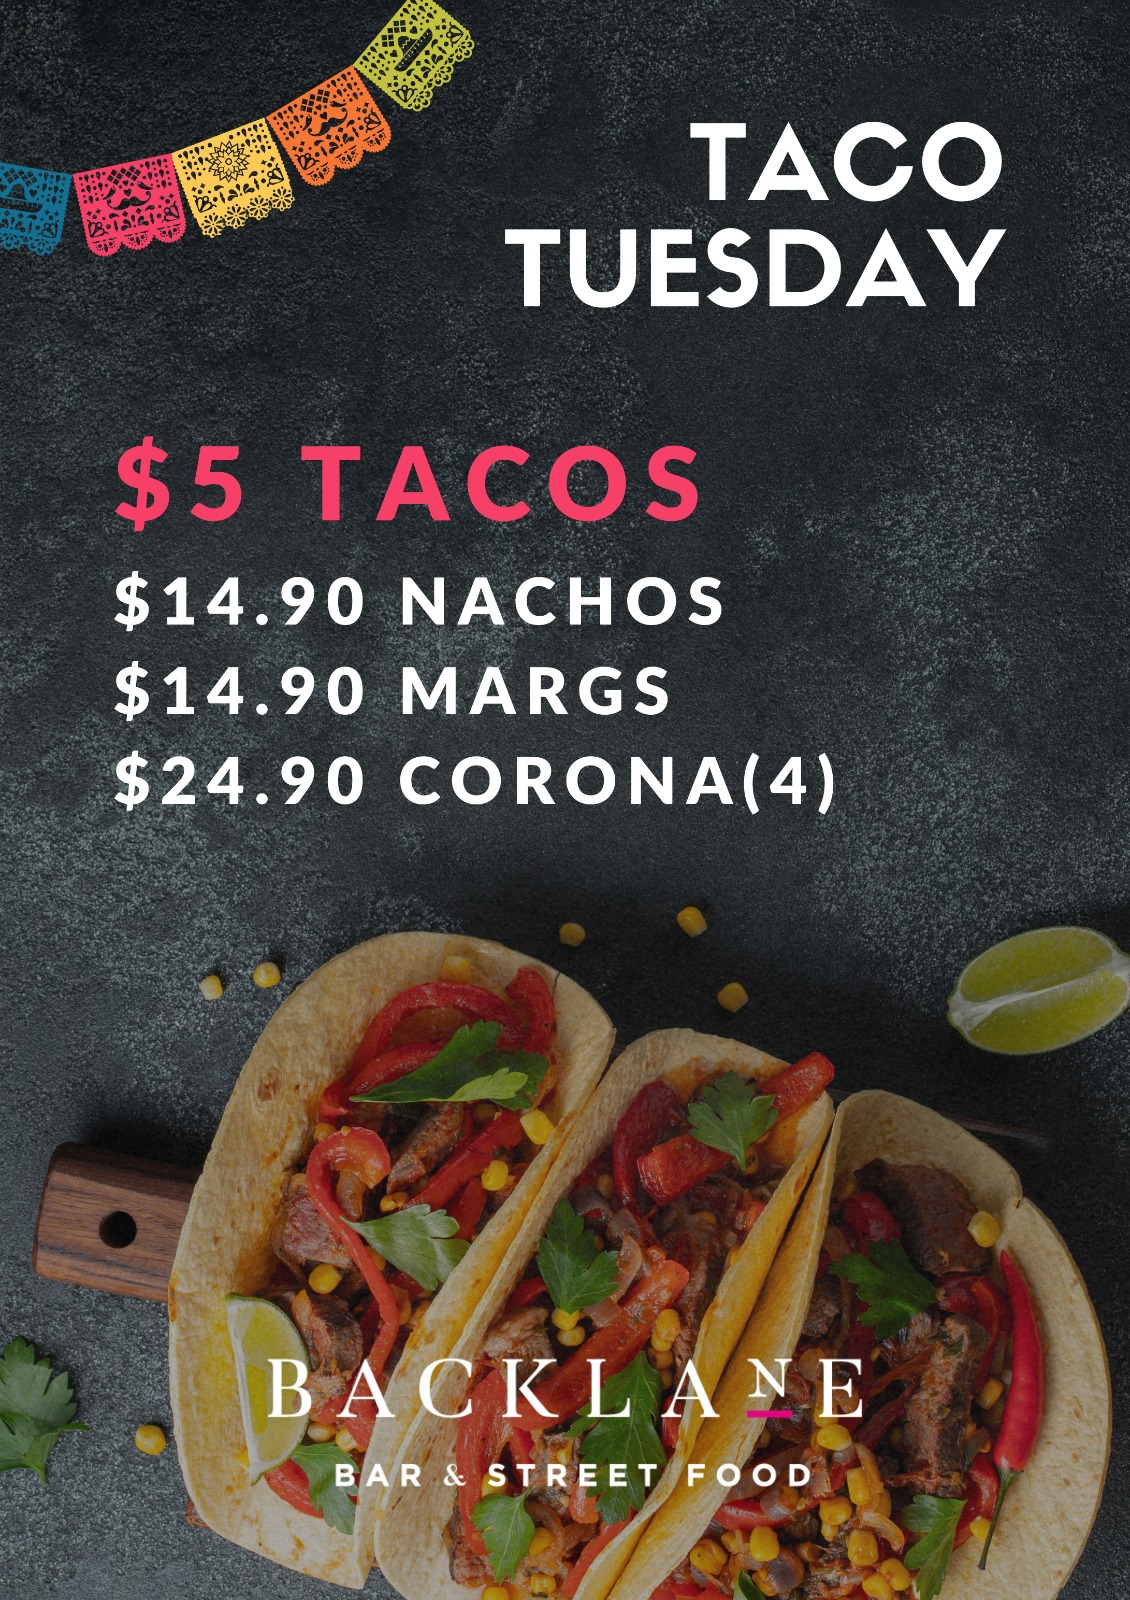 Taco Tuesday in Mooloolaba just got a whole lot tastier at Backlane Bar and Street Food.